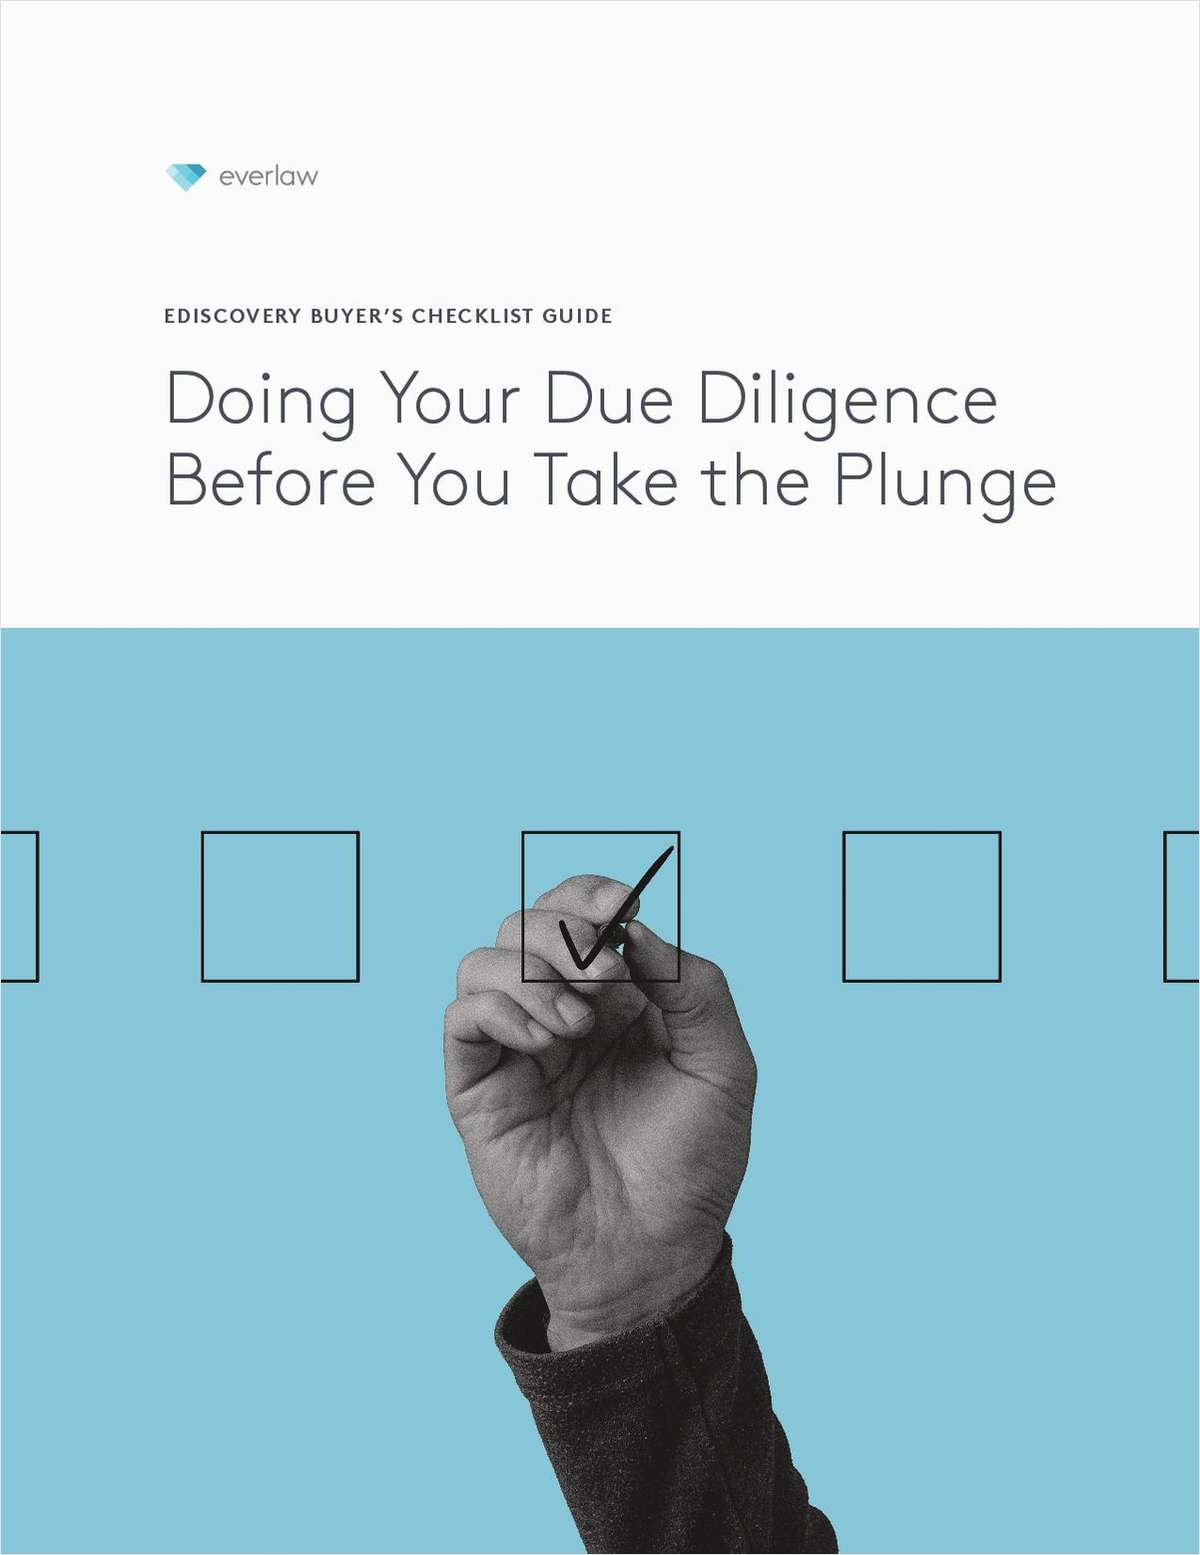 Ediscovery Buyer's Checklist: Doing Your Due Diligence Before You Take the Plunge